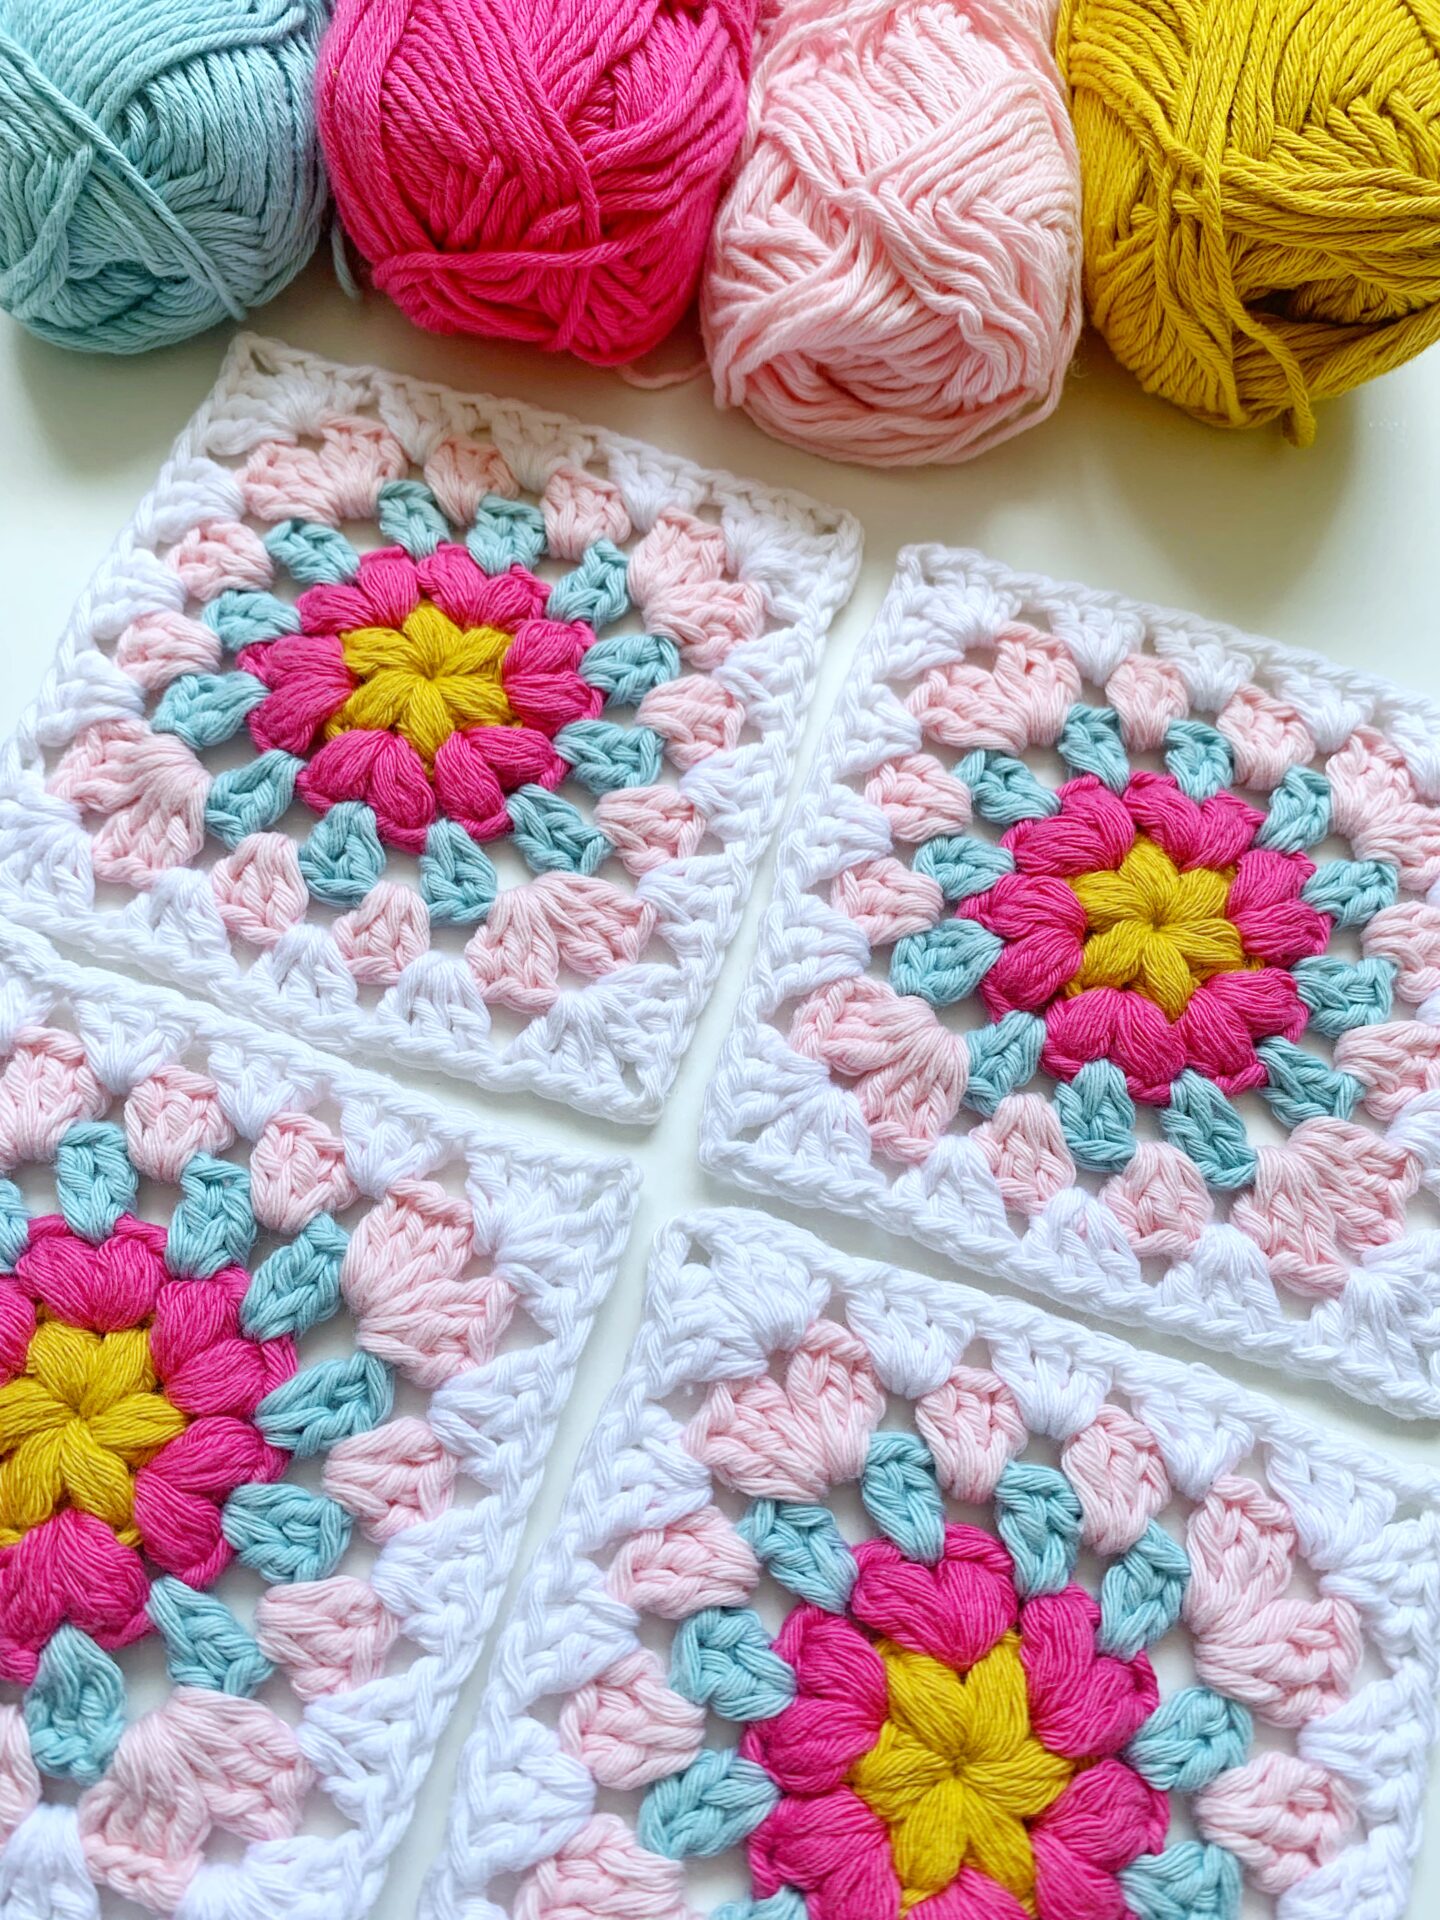 THNLife - Granny Square Day 2020 : Simply Crochet Magazine